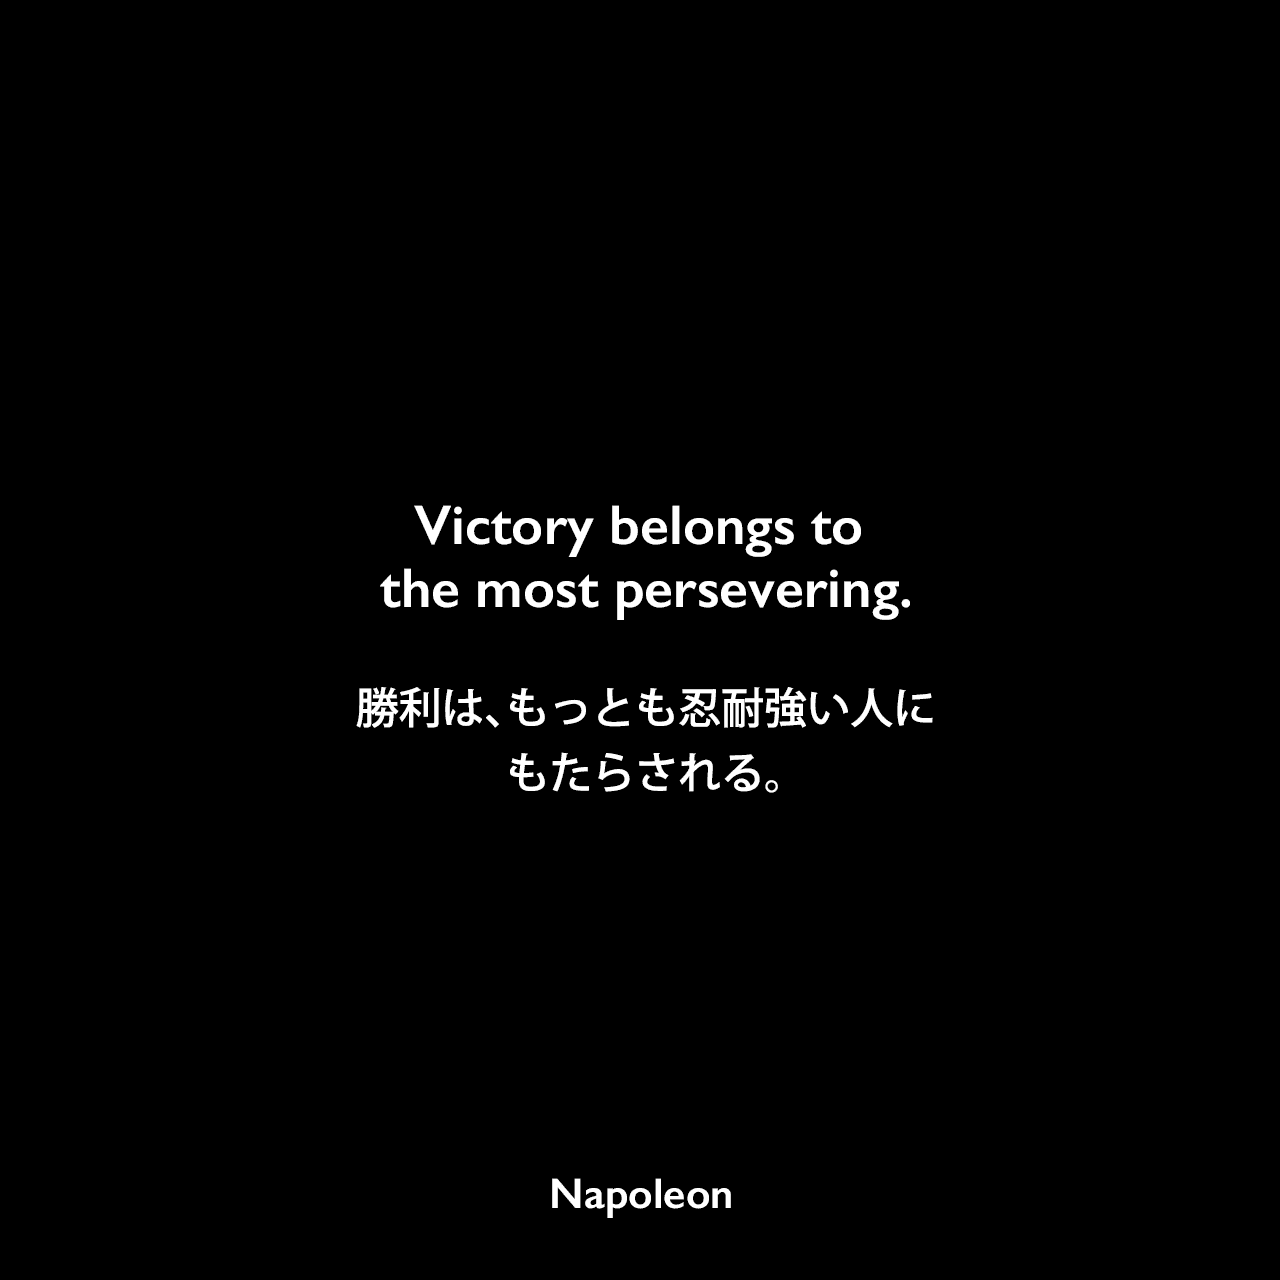 Victory belongs to the most persevering.勝利は、もっとも忍耐強い人にもたらされる。